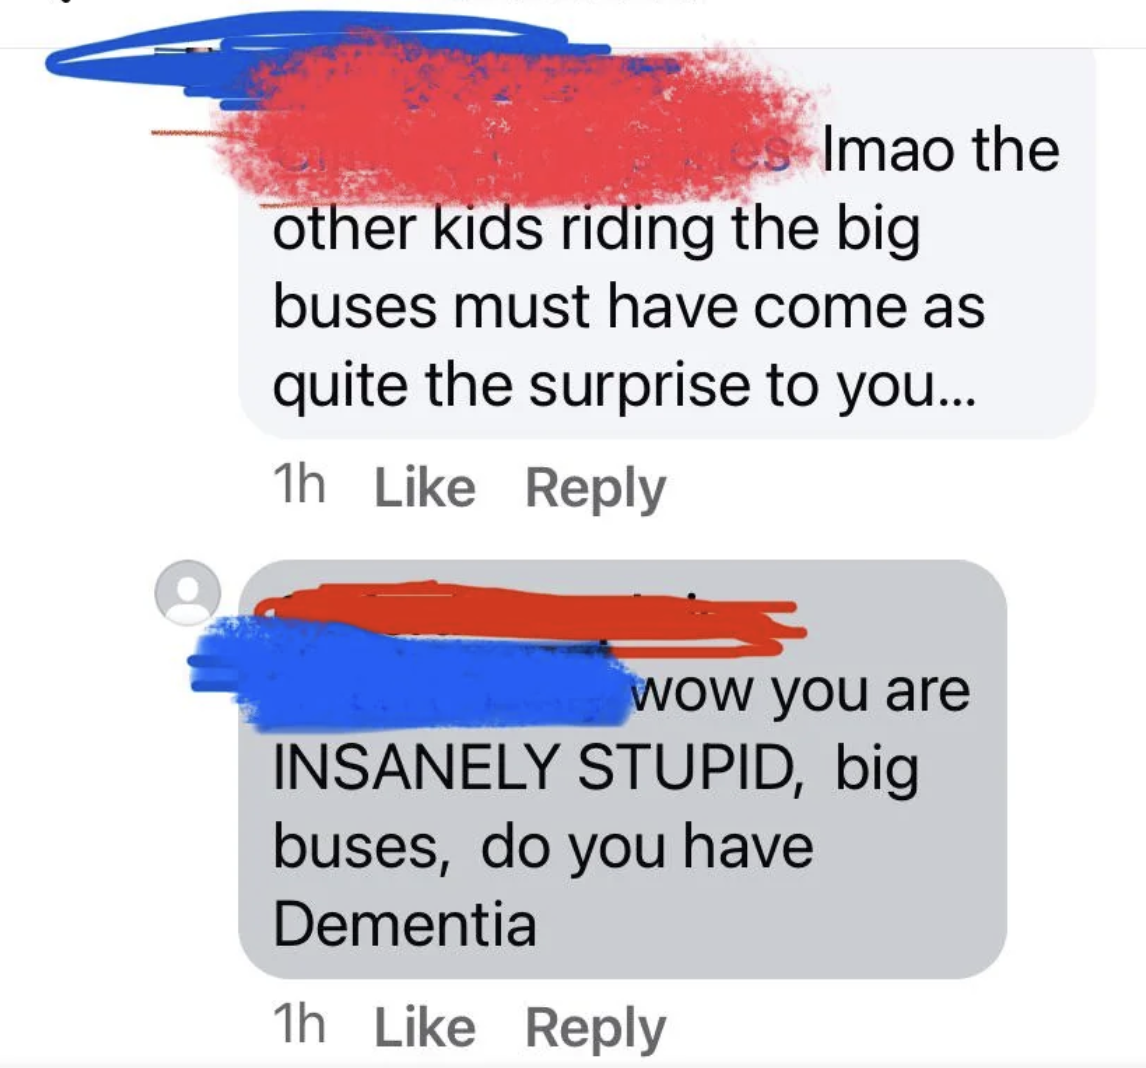 graphic design - Imao the other kids riding the big buses must have come as quite the surprise to you... 1h wow you are Insanely Stupid, big buses, do you have Dementia 1h